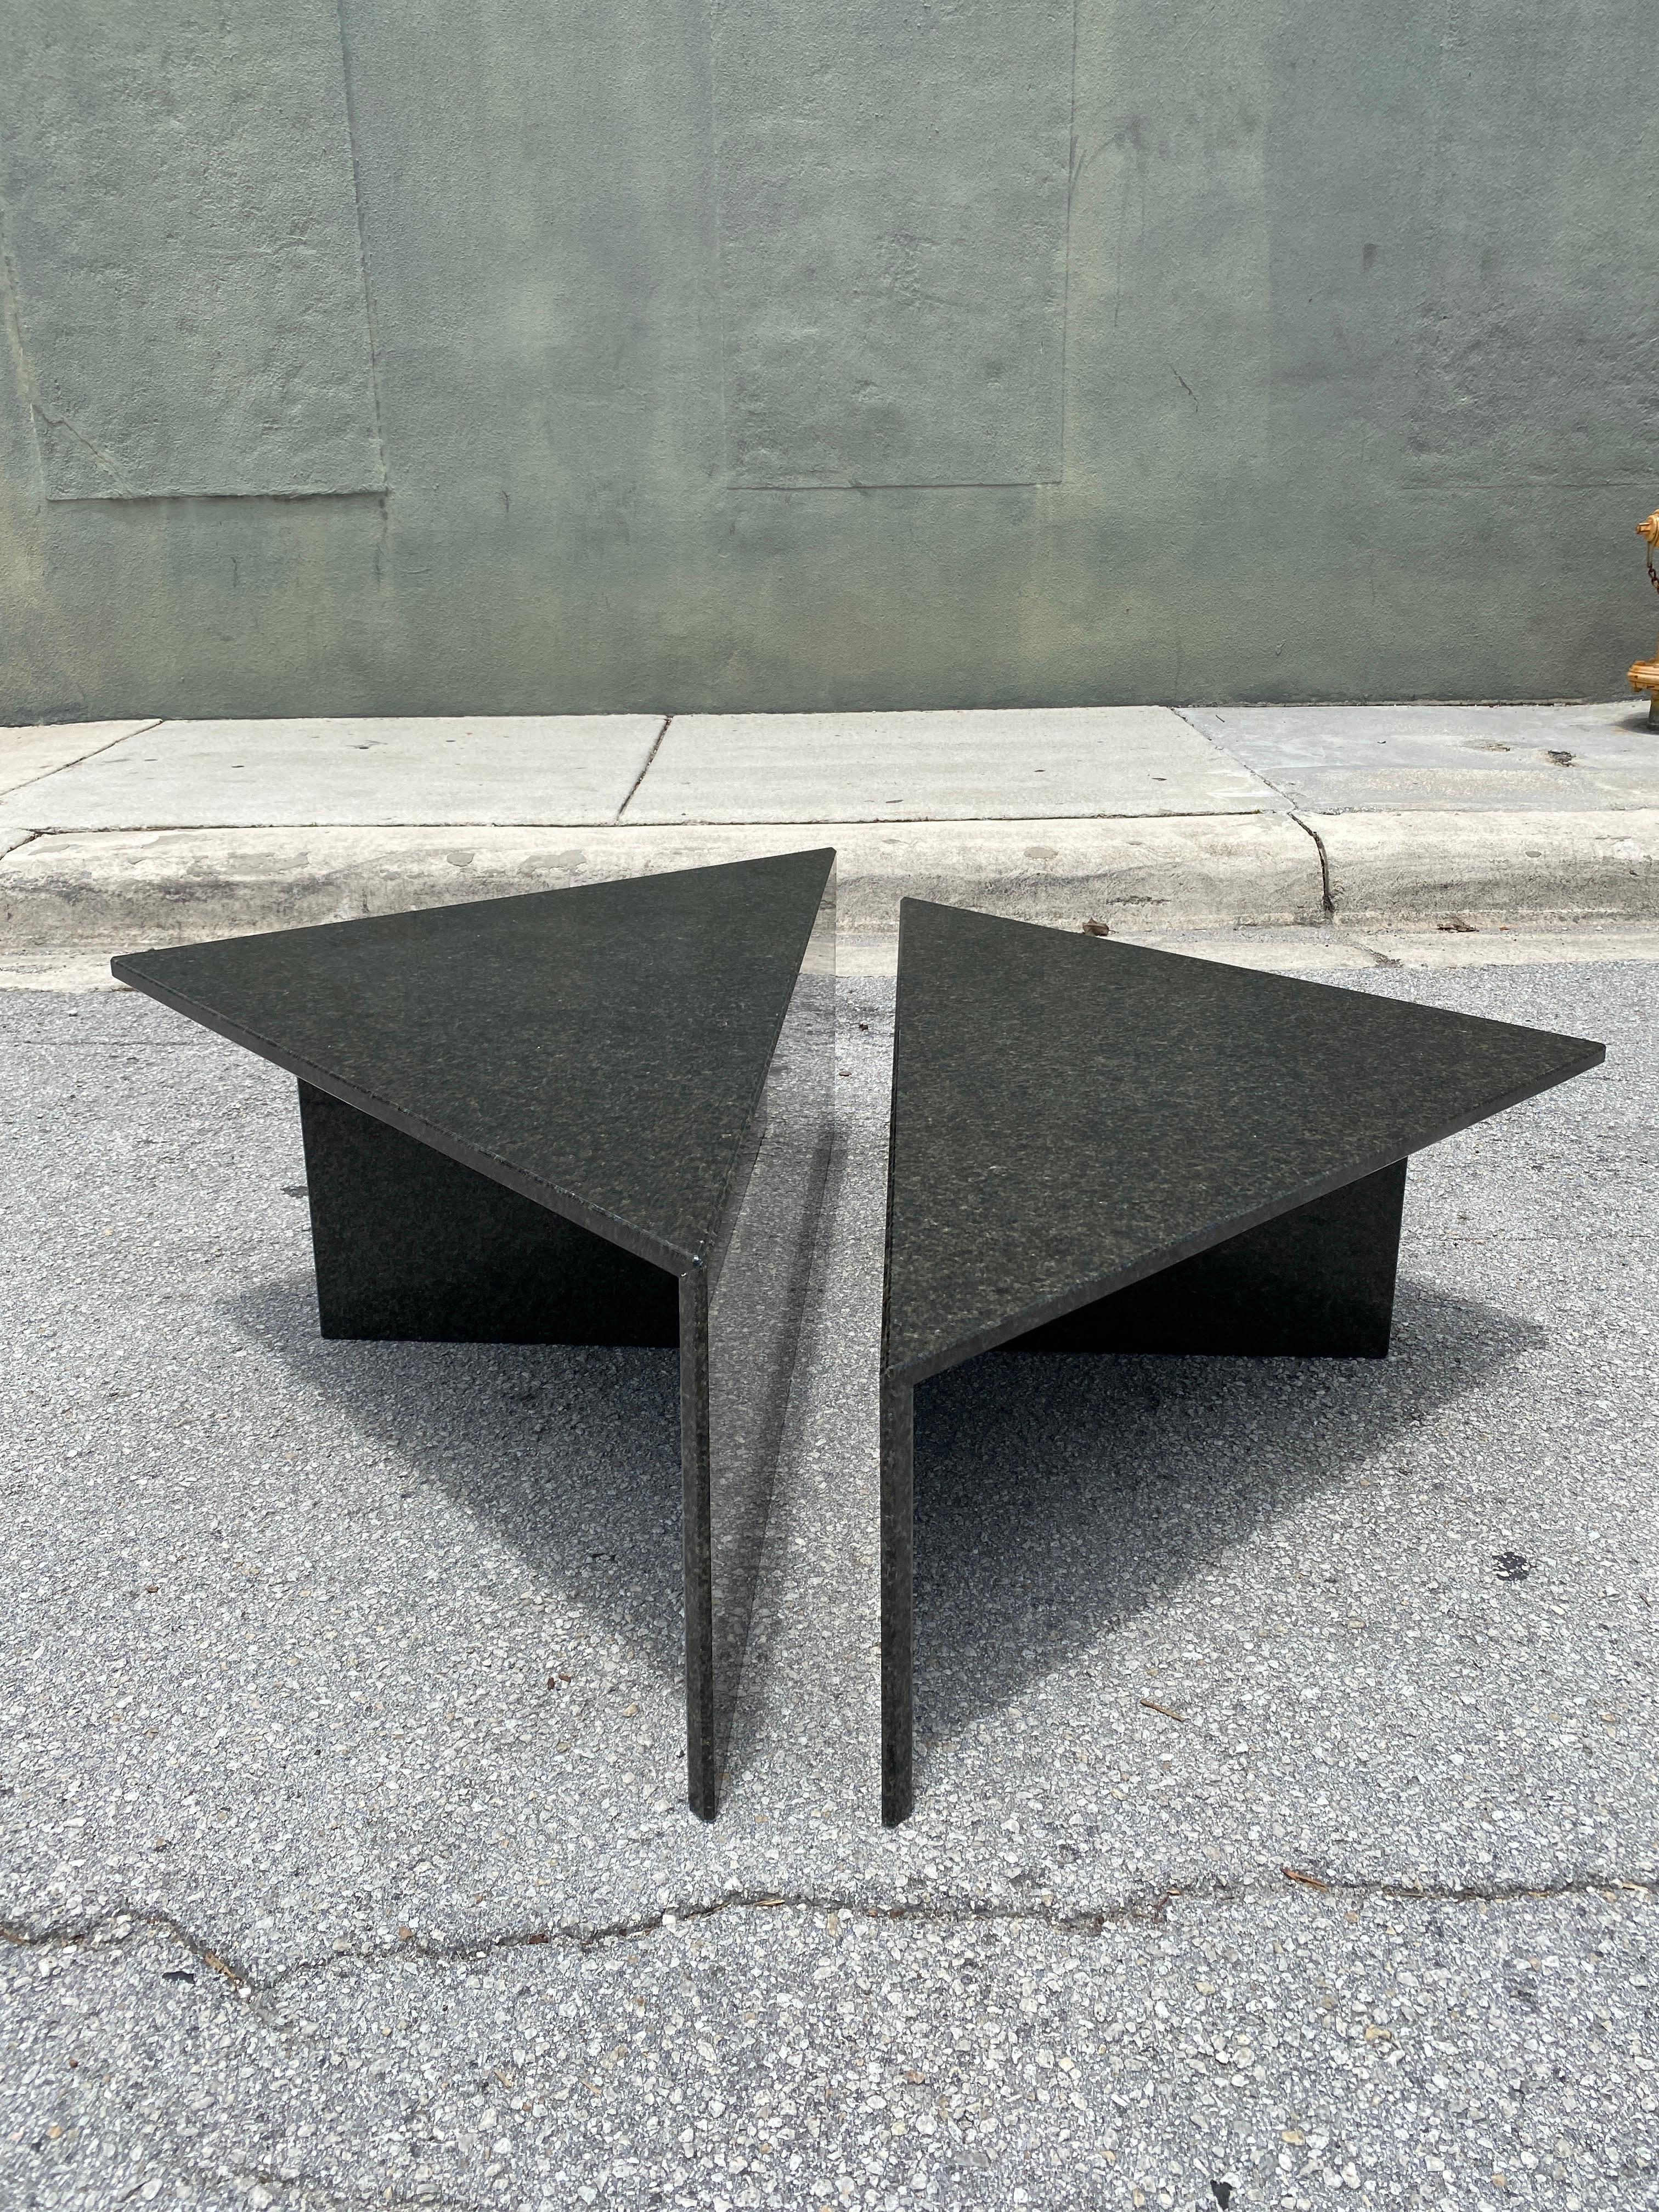 Classic post modern tiered Italian black Granite coffee piece comprised of 2 triangular shape tables of different heights, they can be configured in any manner to form a square or a rectangle. They can also be used as end tables.

Excellent